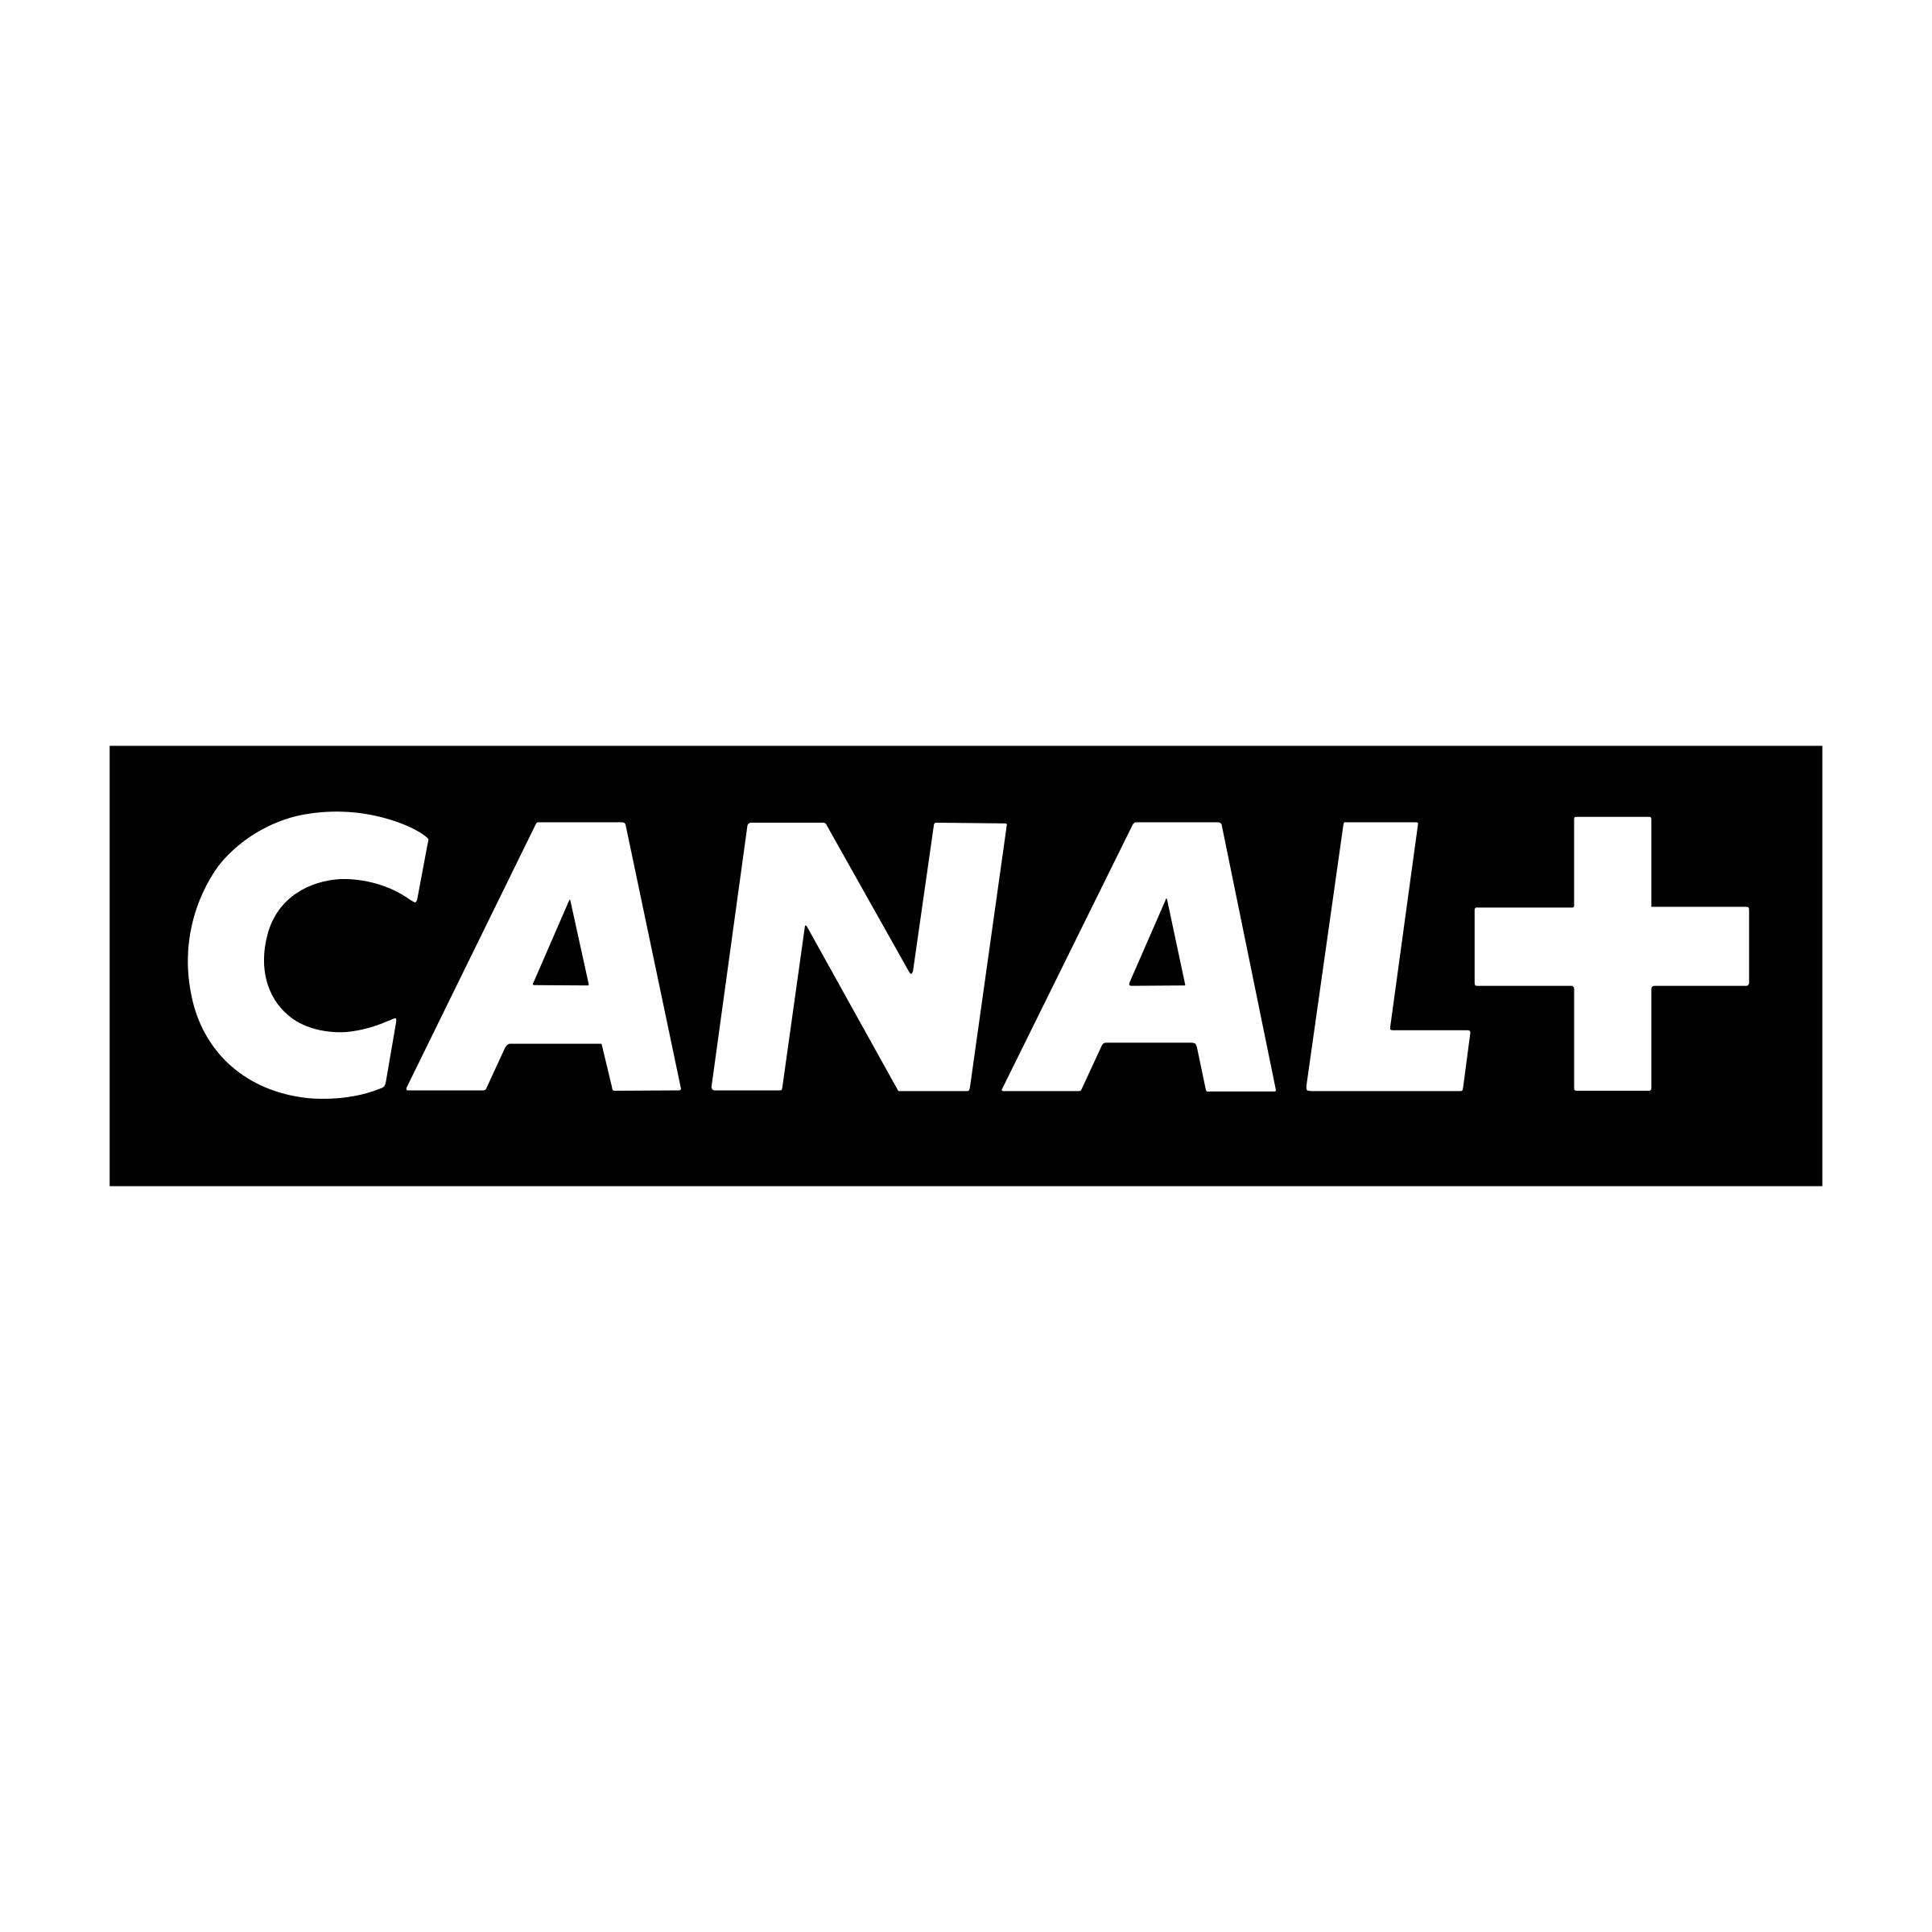 canal-logo-png